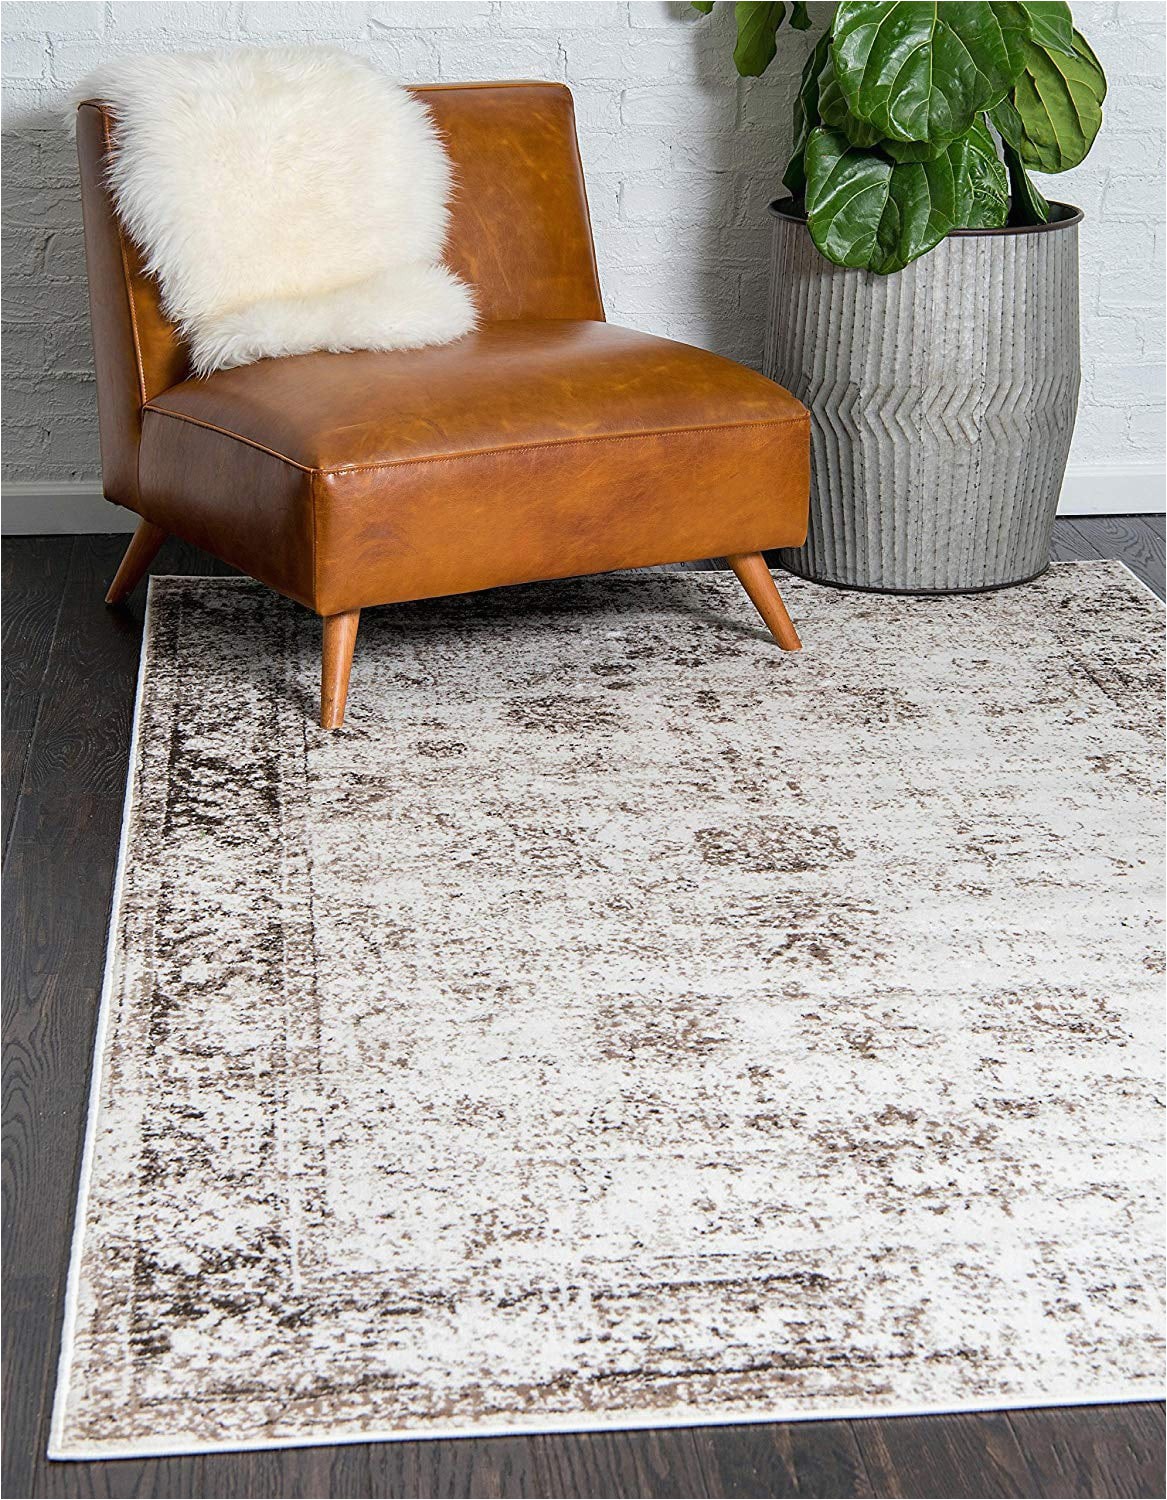 Best Place to Get Cheap area Rugs Best Cheap area Rugs From Amazon